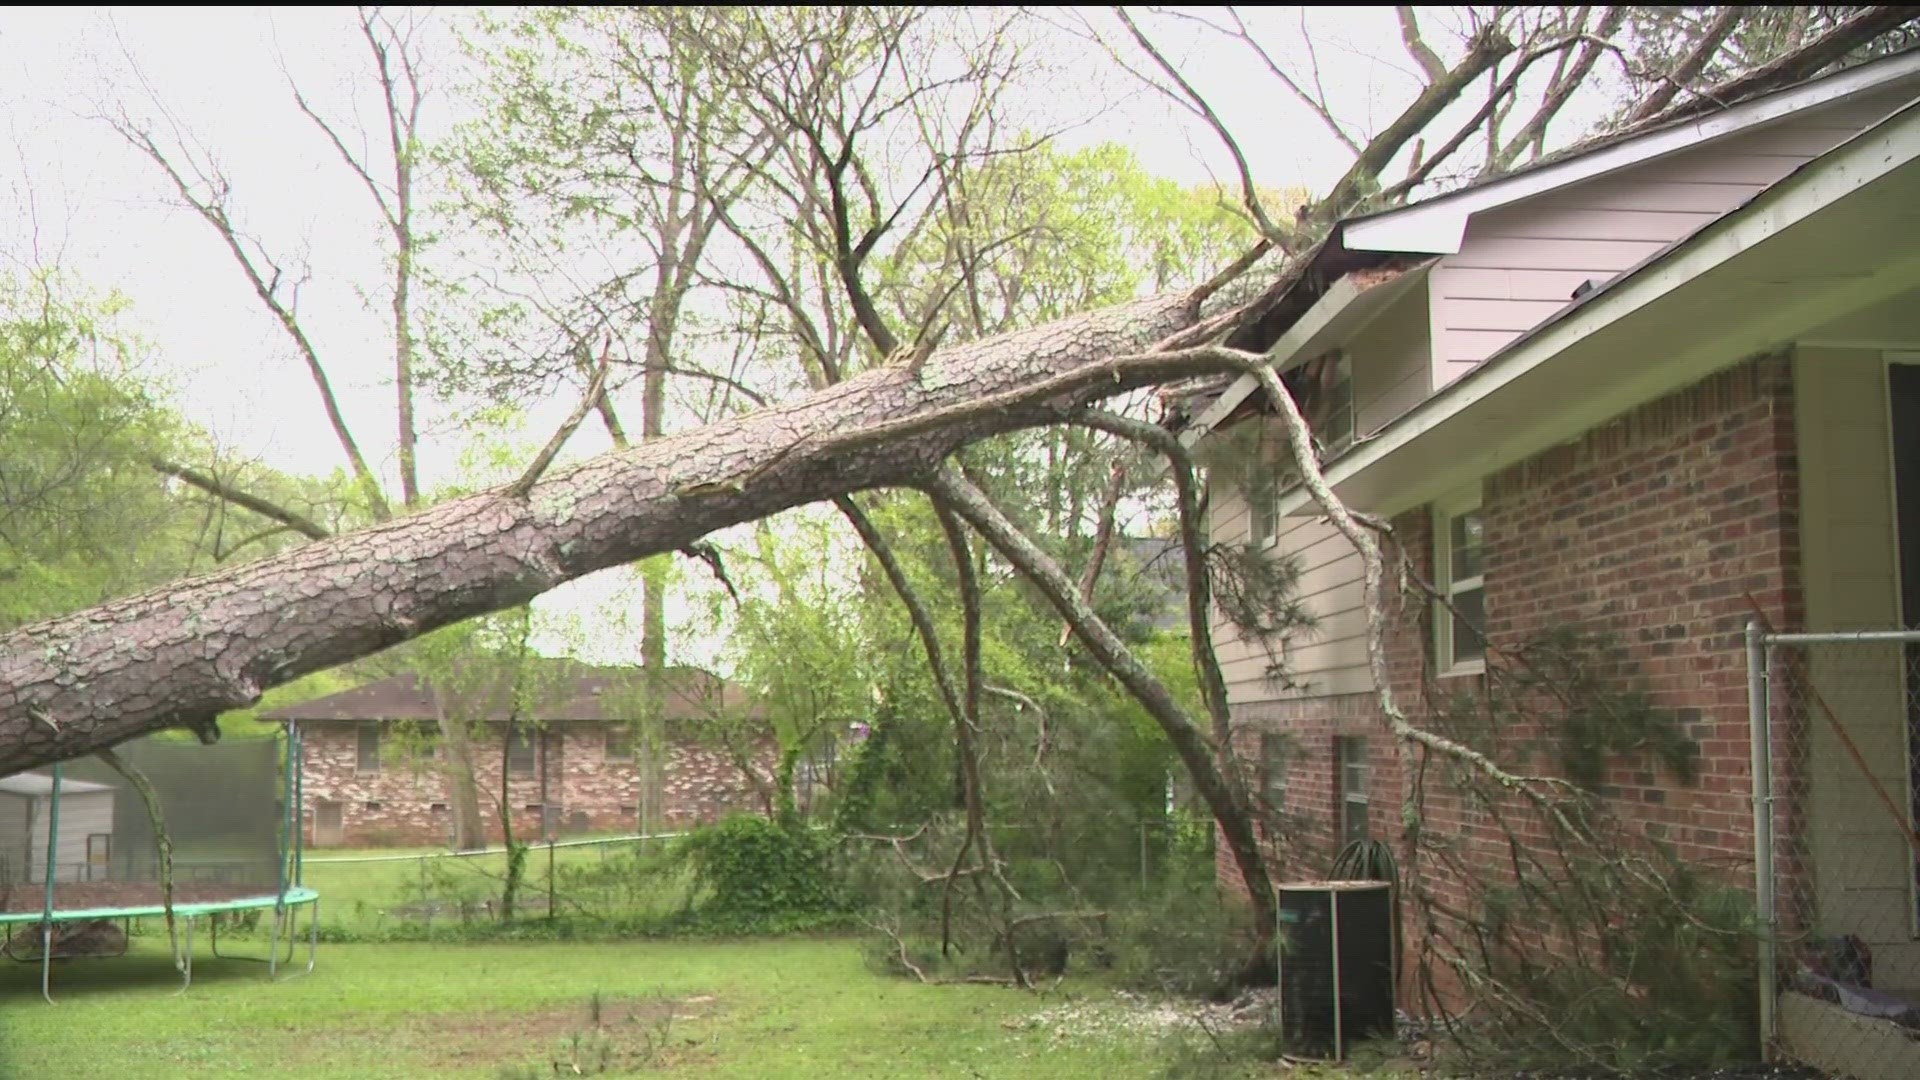 Storms swept through metro Atlanta and north Georgia late Wednesday night into Thursday morning, bringing heavy winds and rain that toppled trees and power lines.